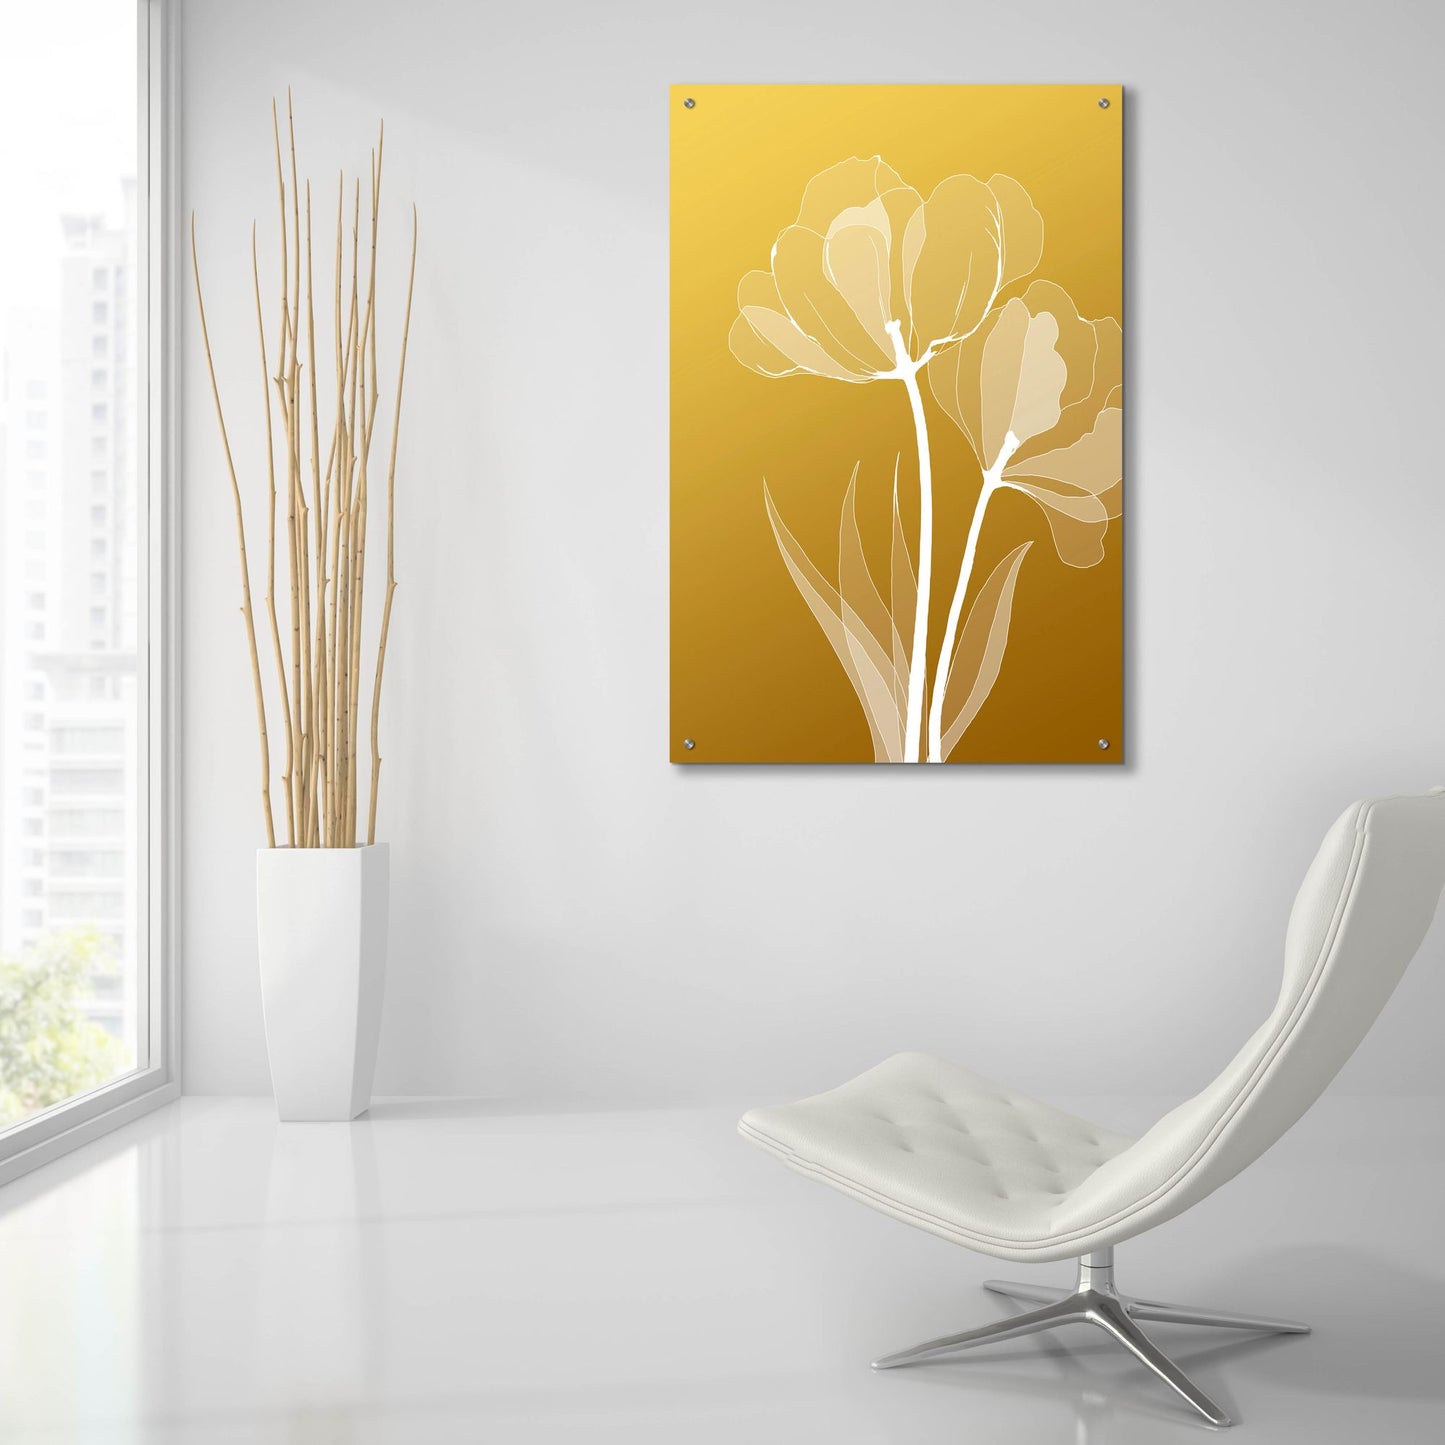 Epic Art 'Floral 6' by Graphinc, Acrylic Glass Wall Art,24x36